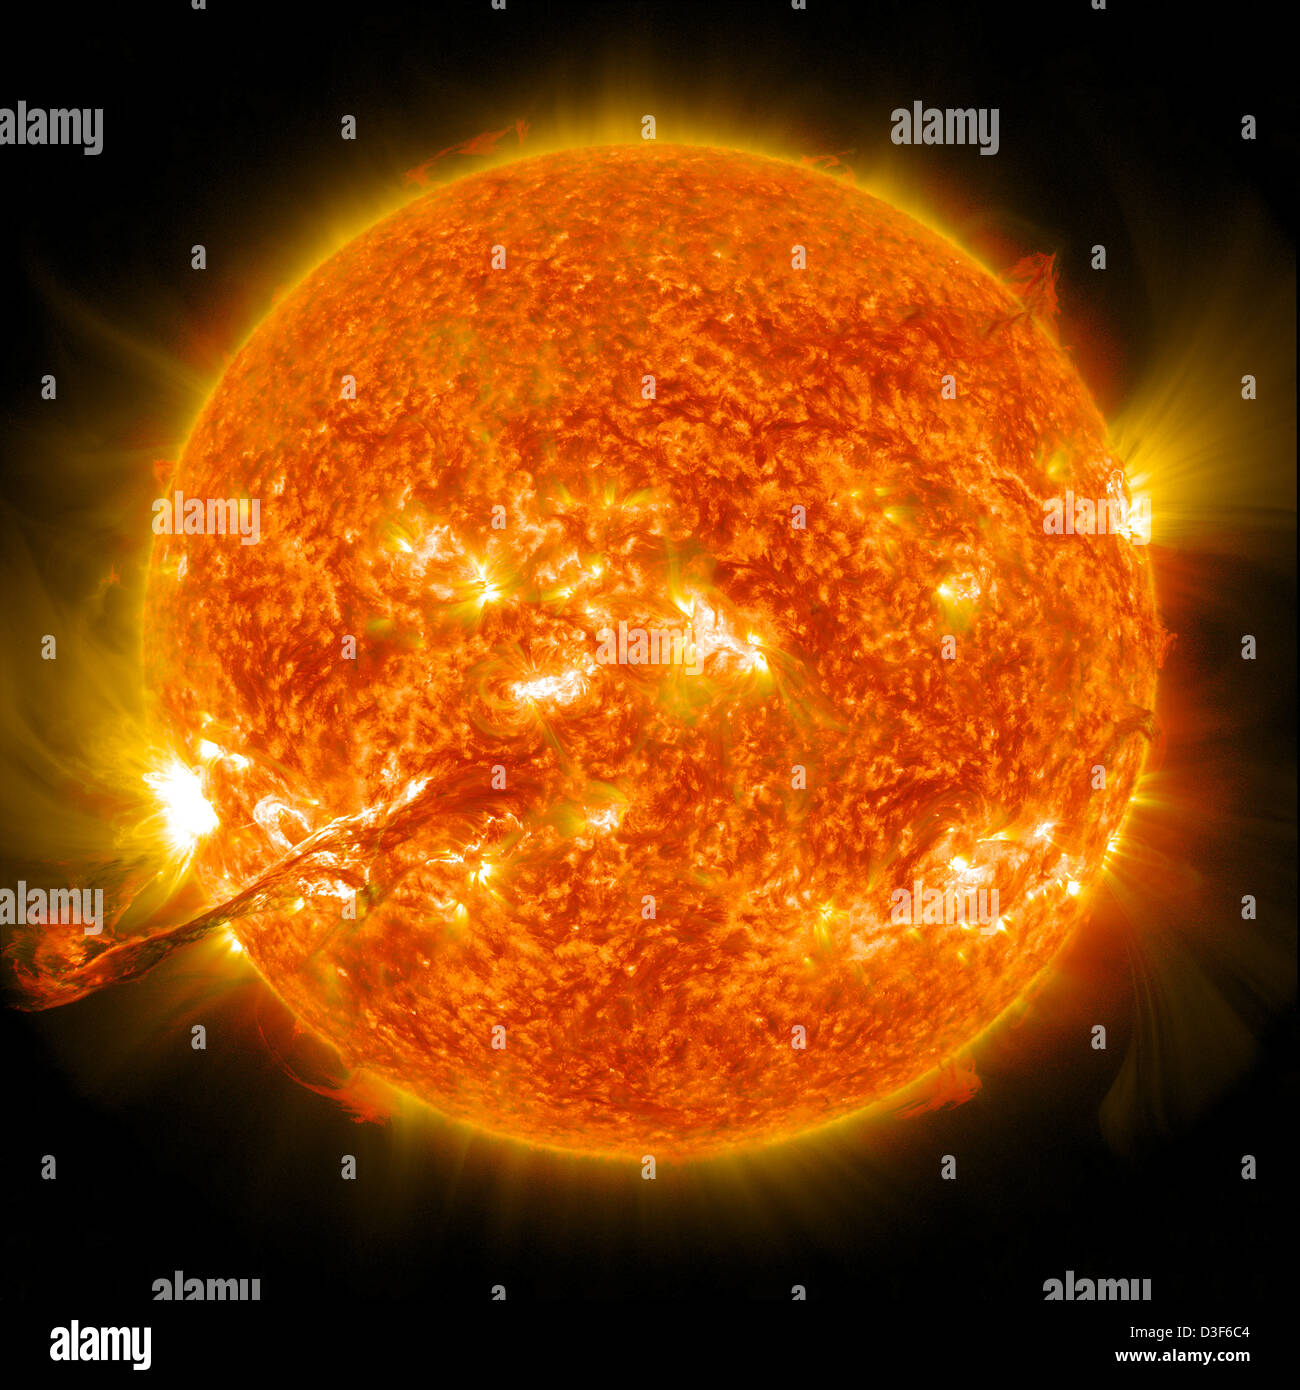 coronal mass ejection or solar flare Stock Photo